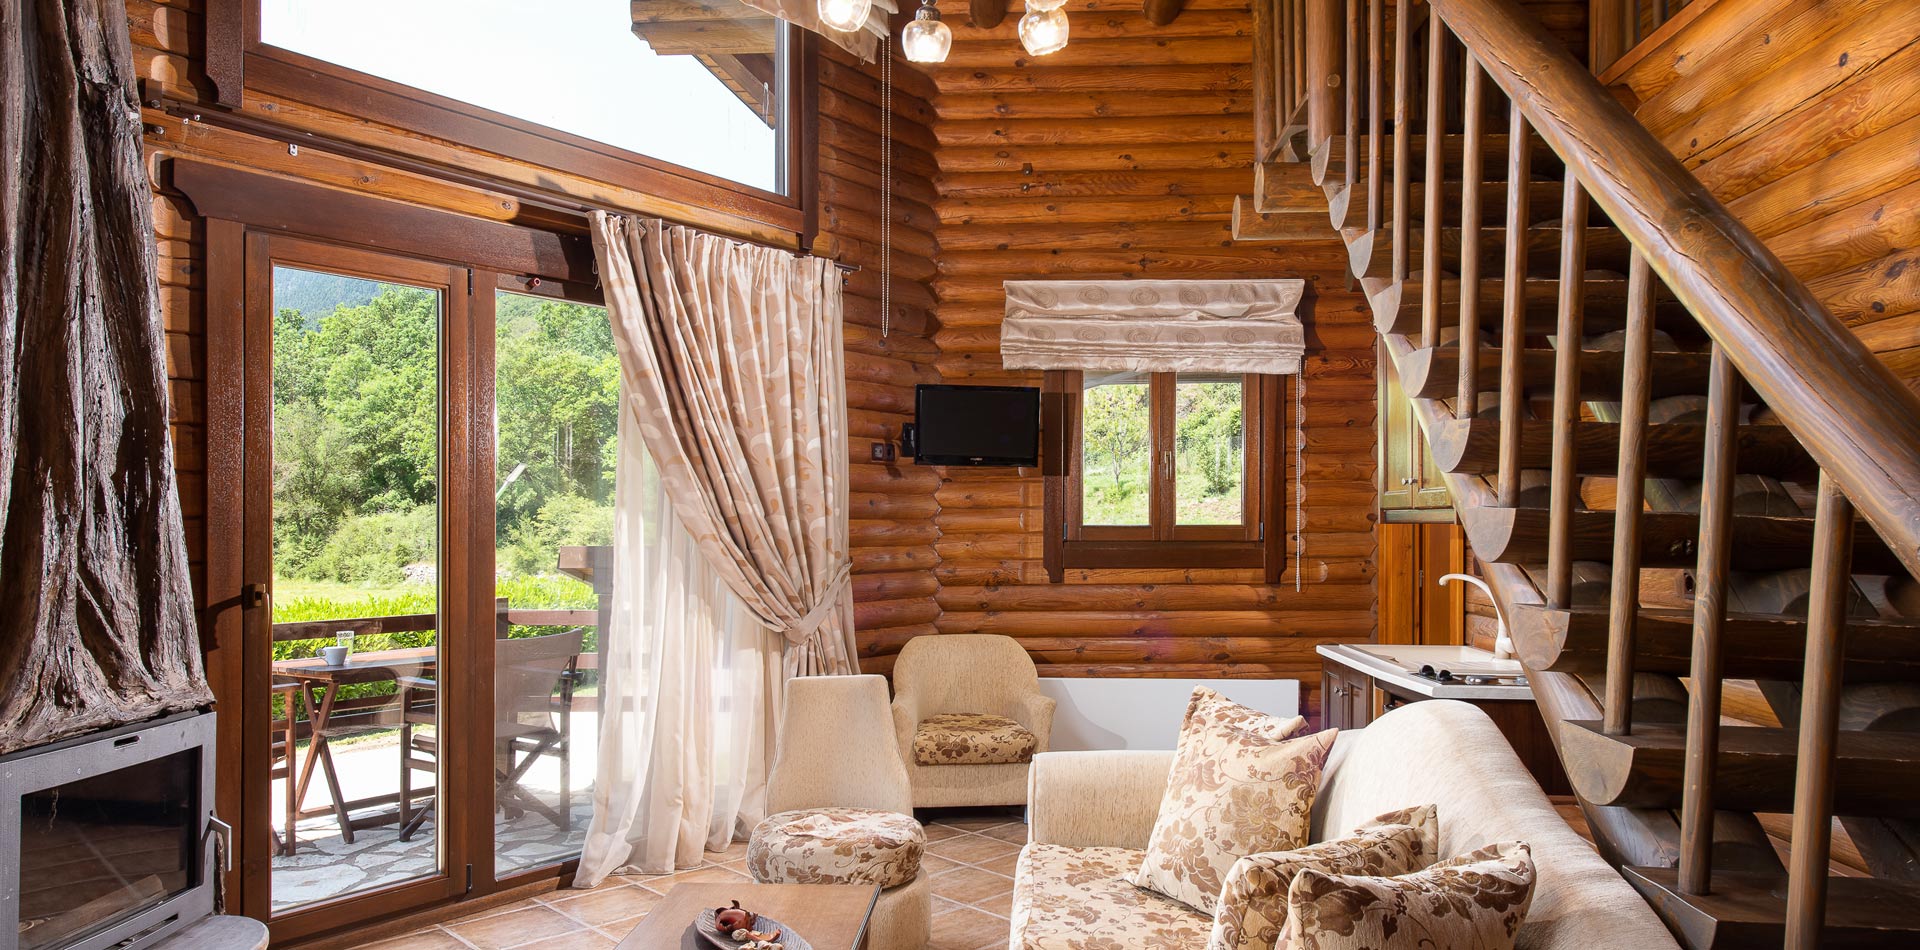 Natura Chalet living room area